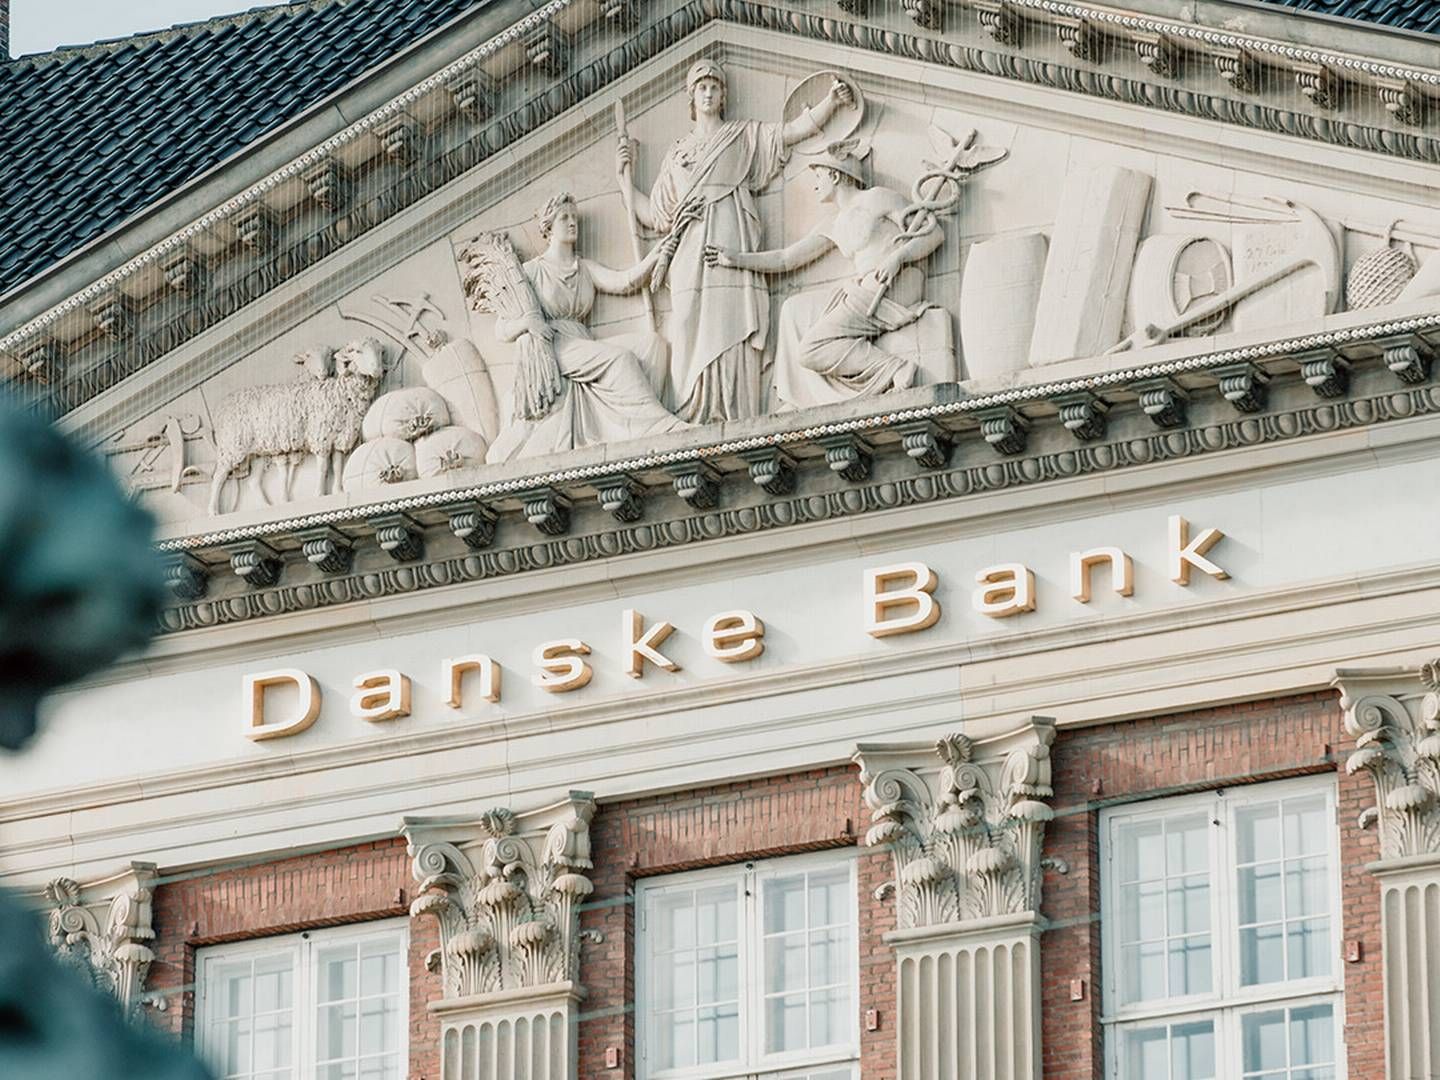 Danske Bank disclosed their climate plan in January. Few Danes view the bank as a contributor in regard to climate action, survey shows. | Foto: Philip Madsen